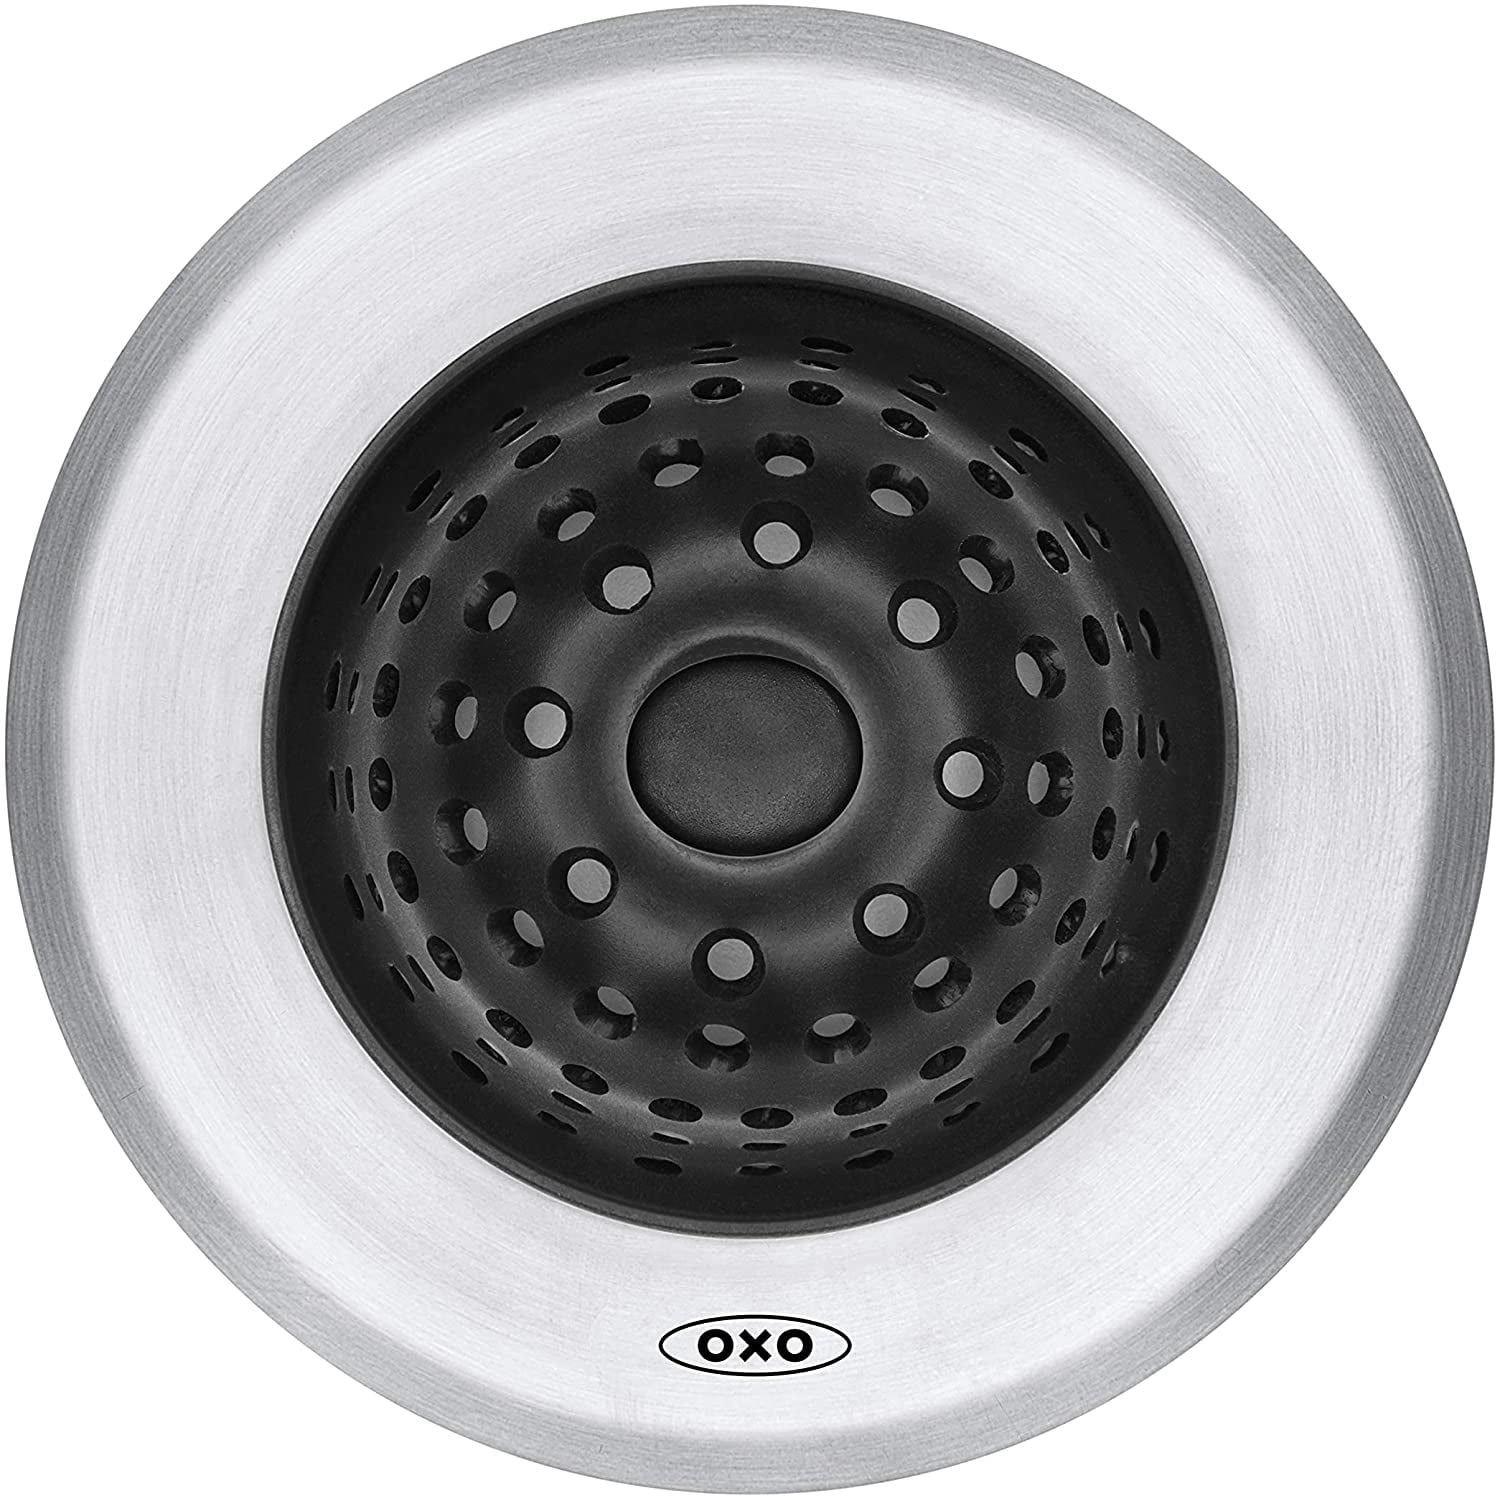  OXO Good Grips 2-in-1 Sink Strainer Stopper, Black : Tools &  Home Improvement